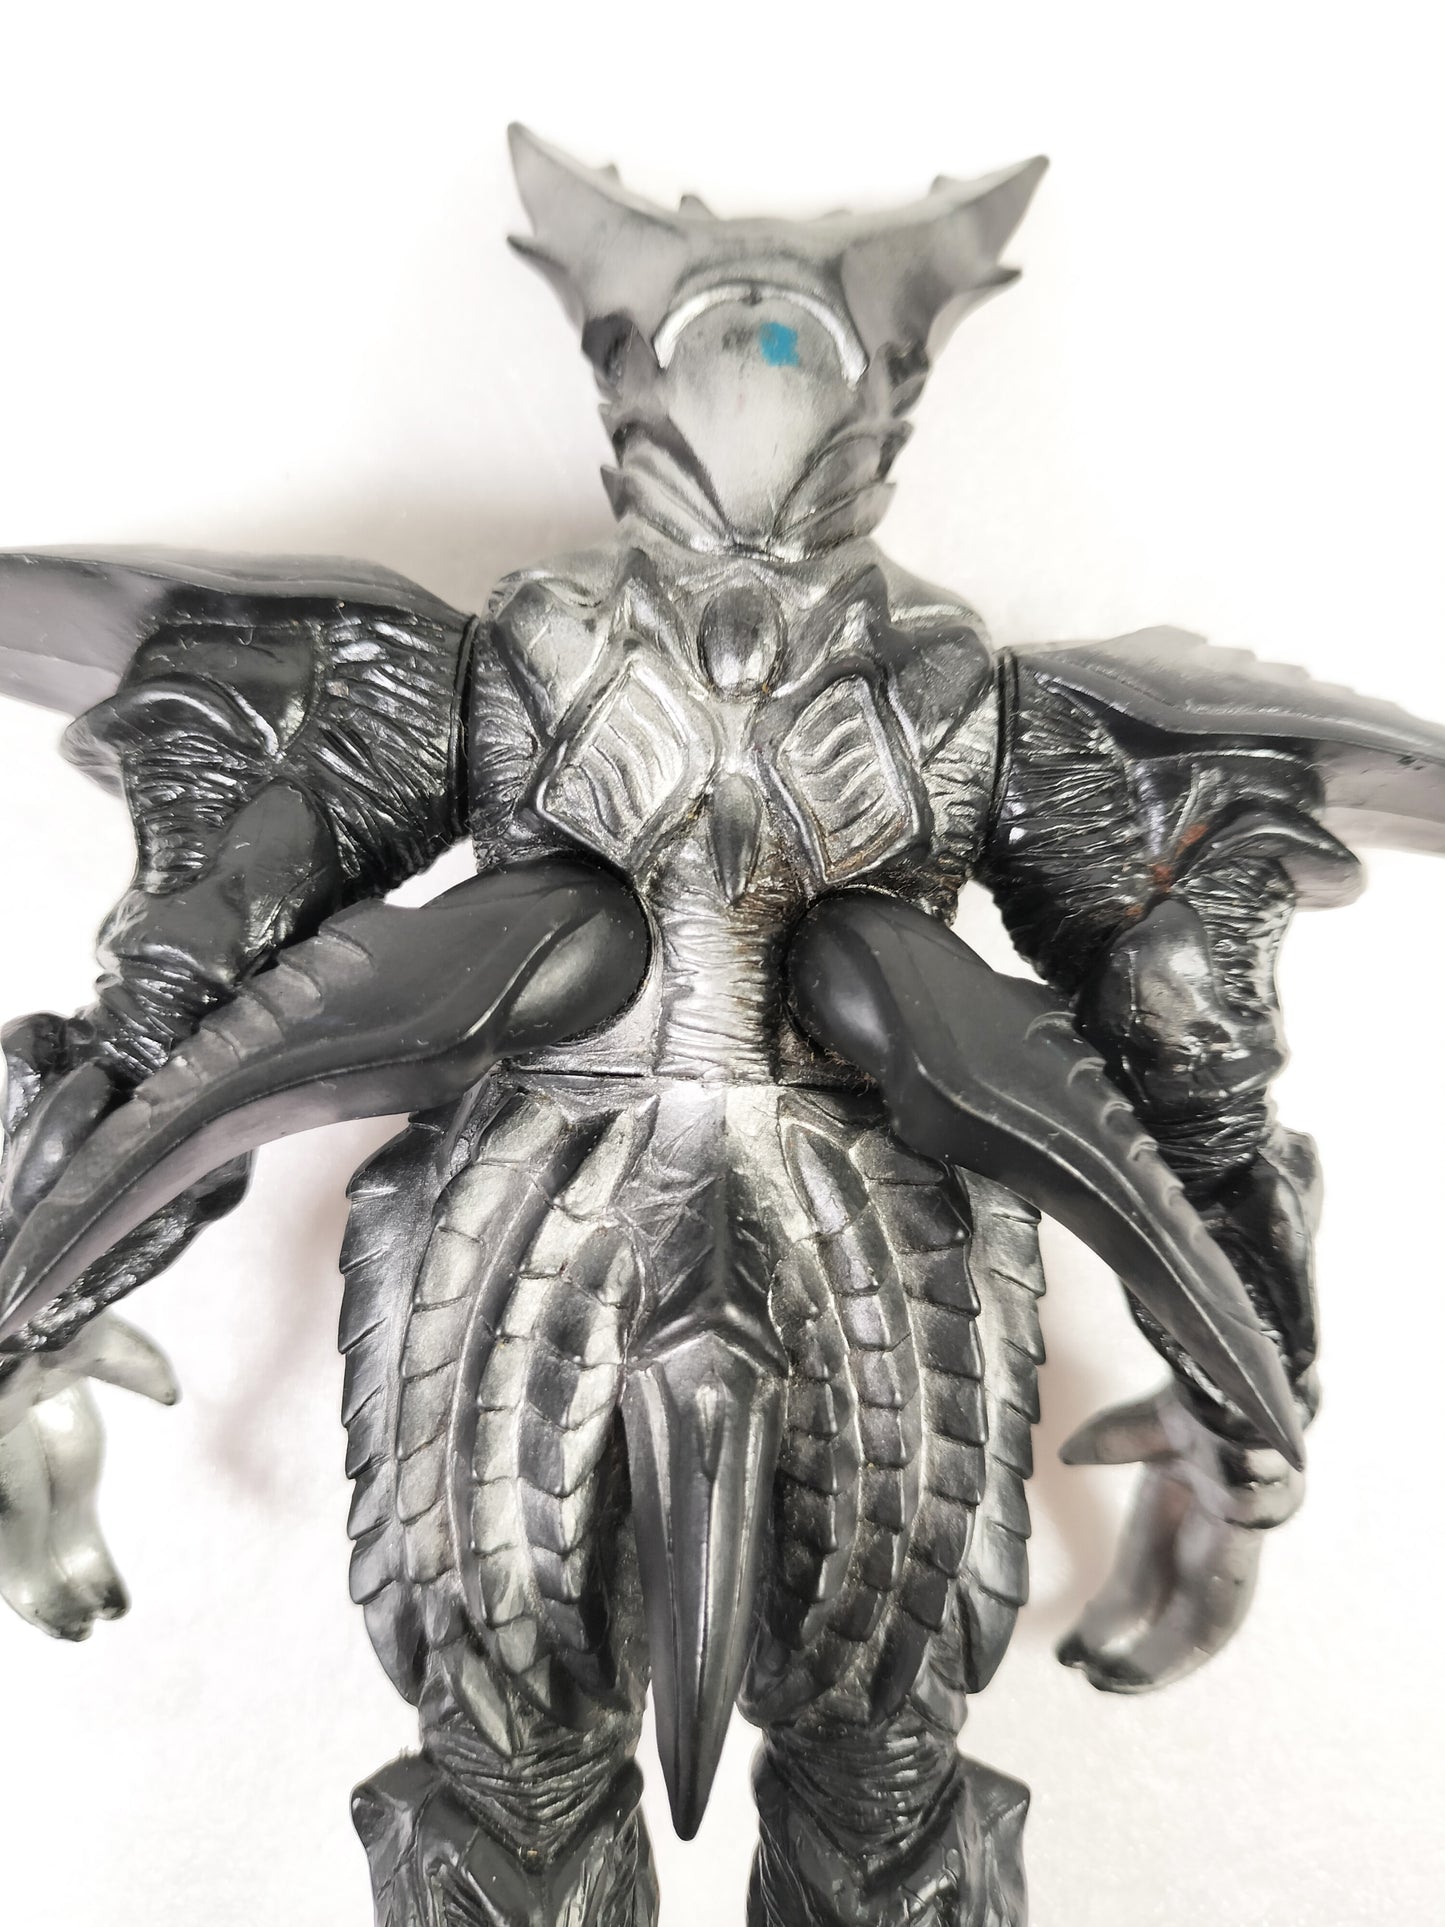 Ultraman series Neo Baltan Made in China Height about 17.5cm Manufactured in 2001 Sofvi Figure retro vintage major scratches and dirt